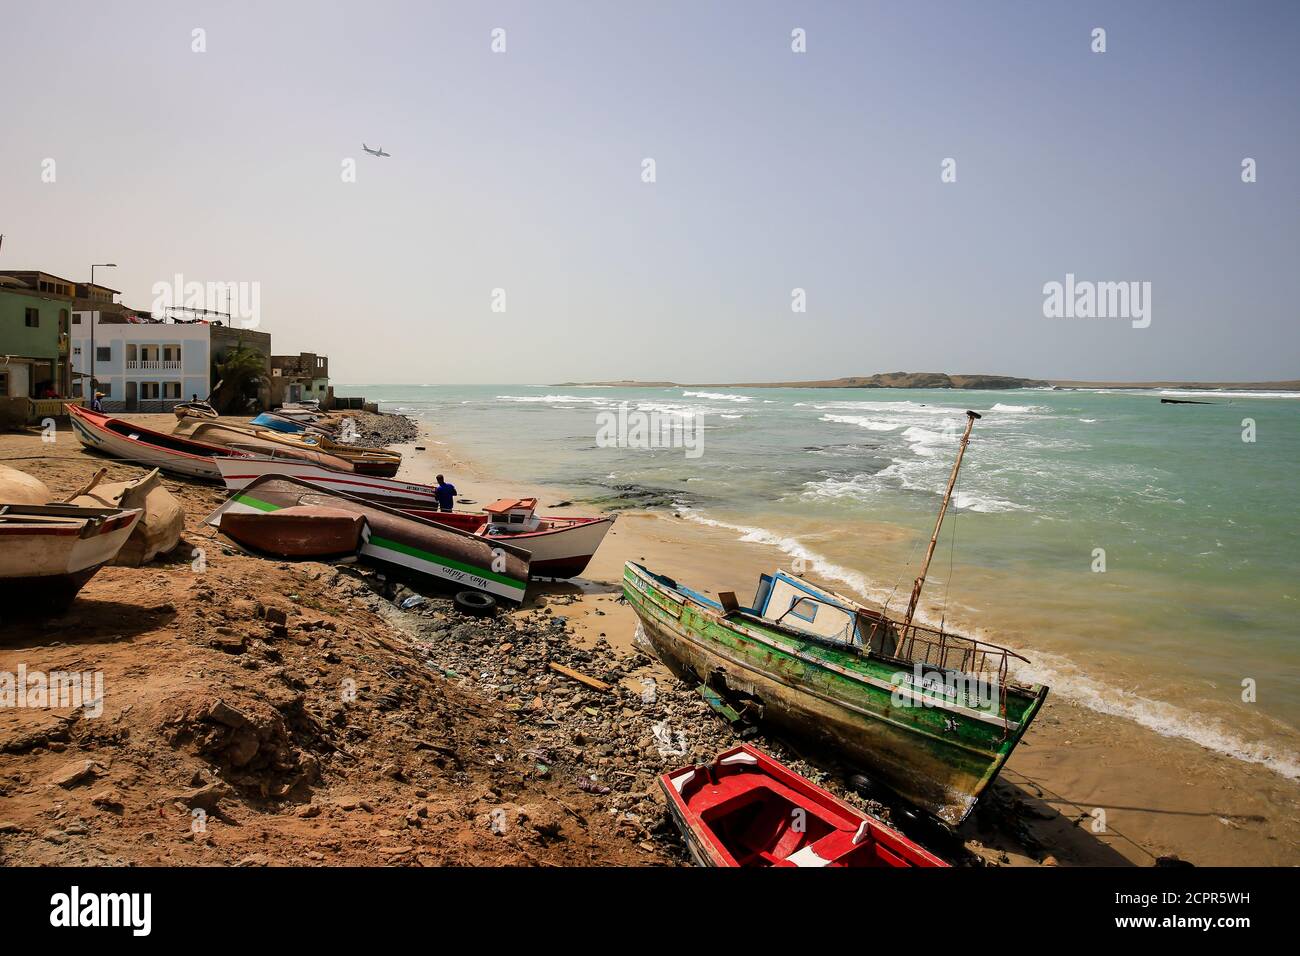 Cape Verde Indigenous High Resolution Stock Photography and Images - Alamy